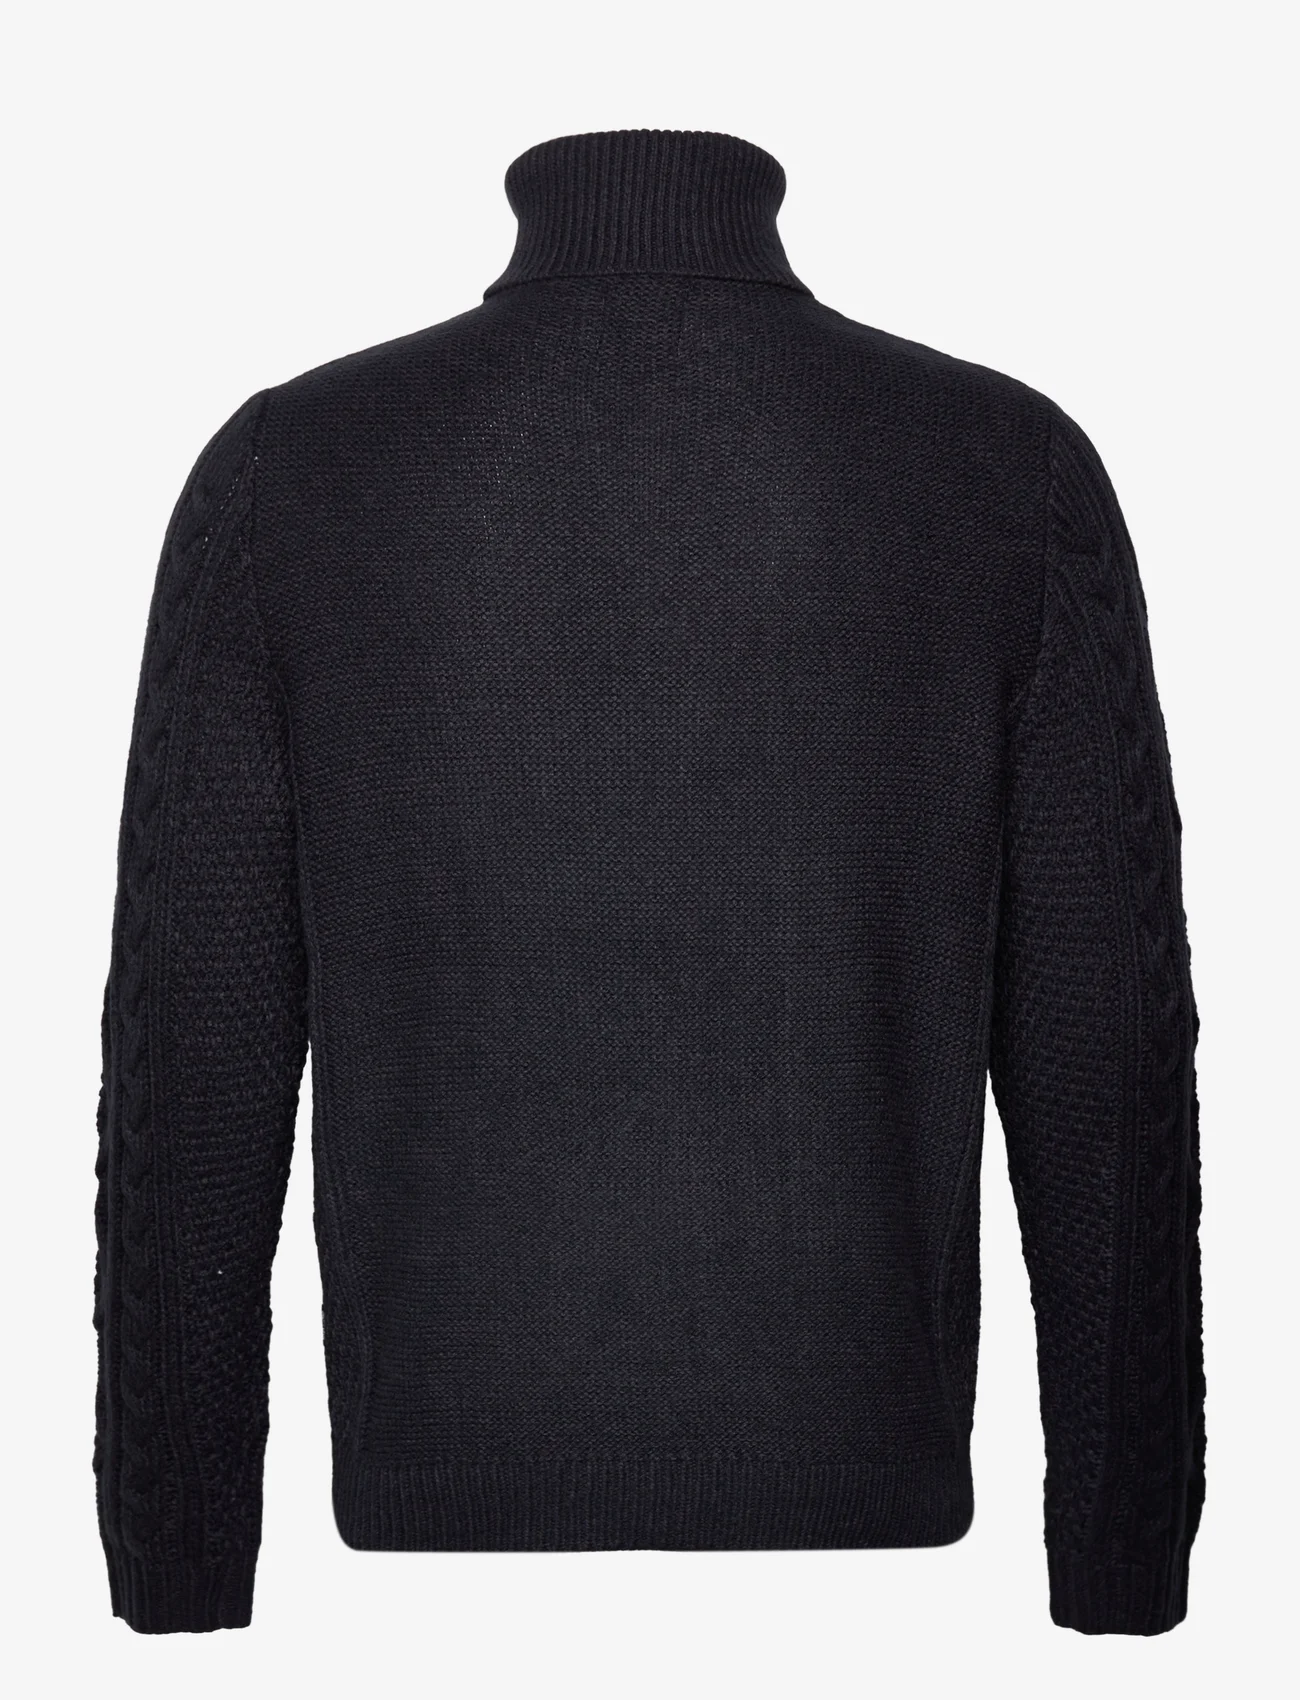 ONLY & SONS - ONSRIGGE REG 3 CABLE ROLL NECK KNIT - madalaimad hinnad - dark navy - 1